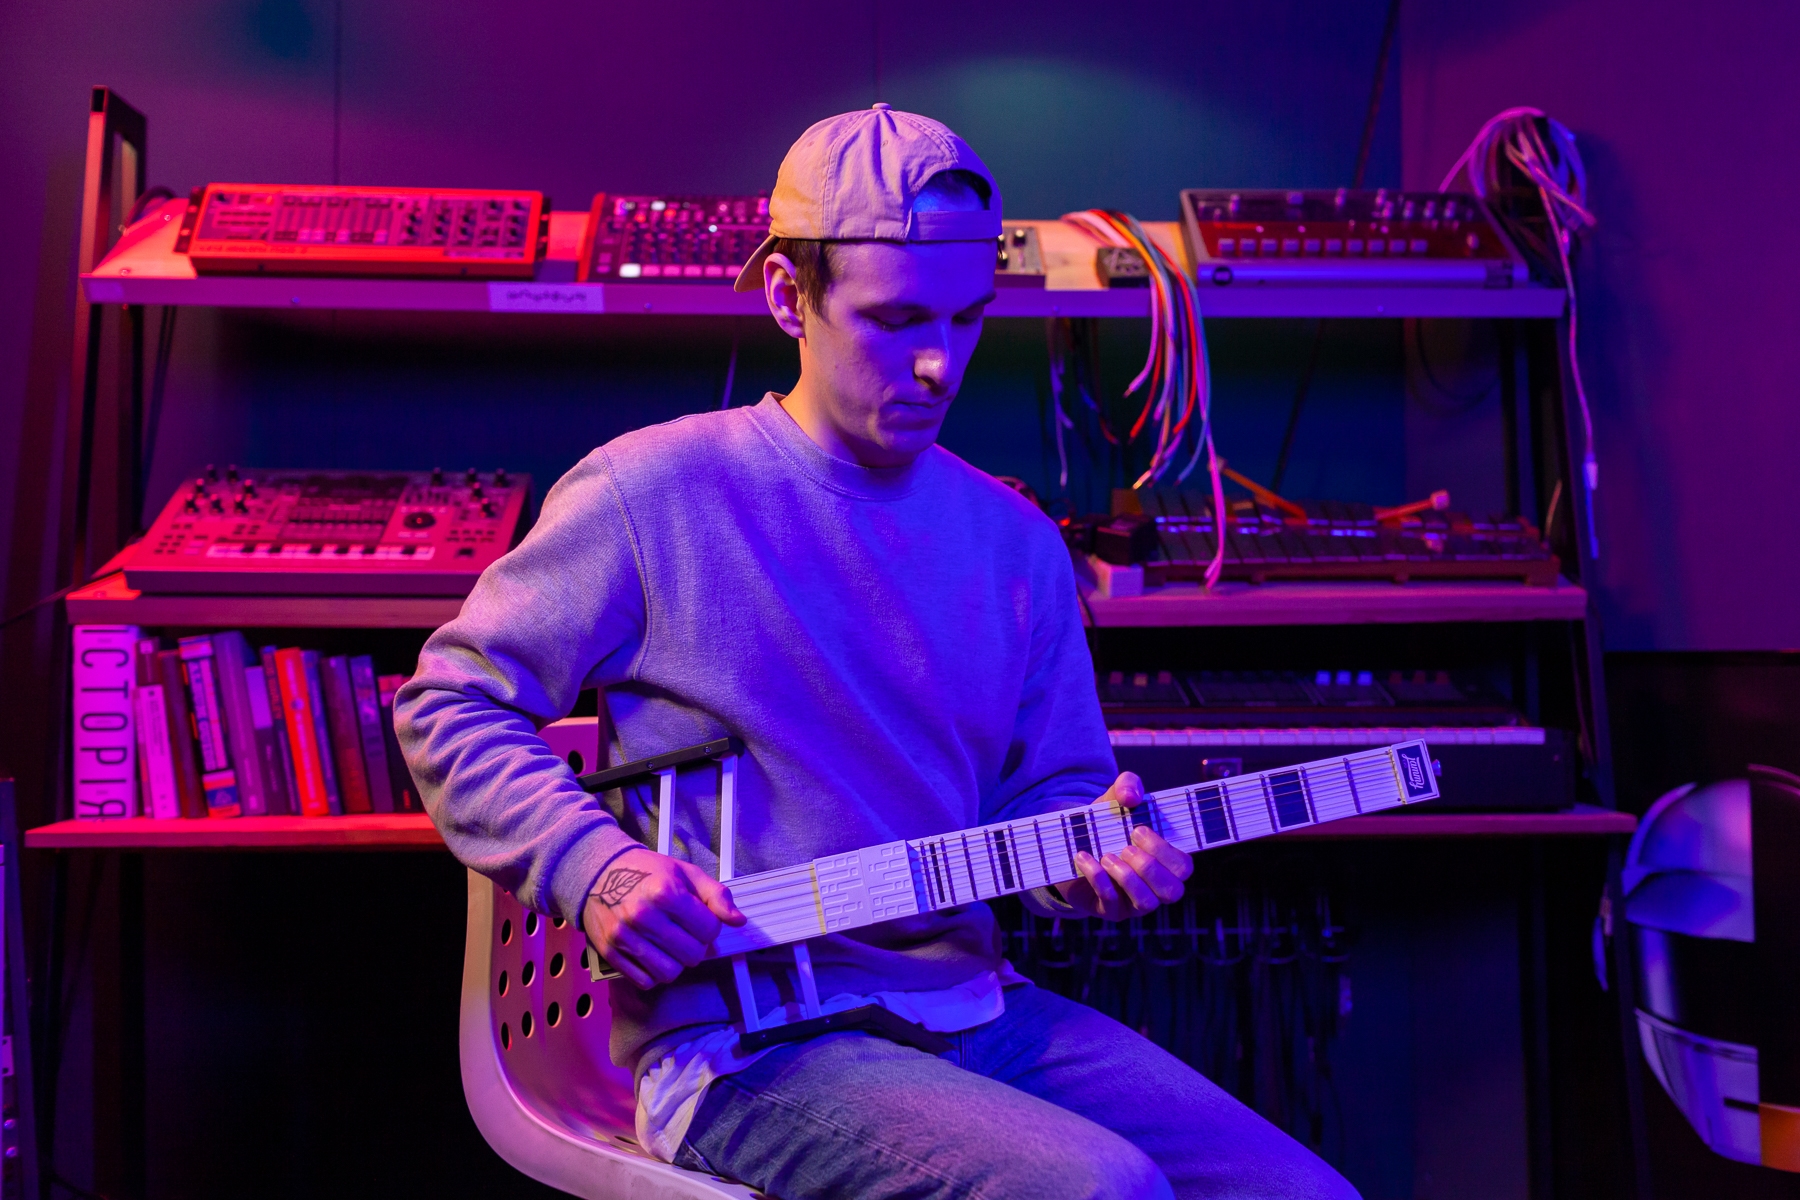 Jammy's new MIDI guitar can control all your virtual instruments | DeviceDaily.com